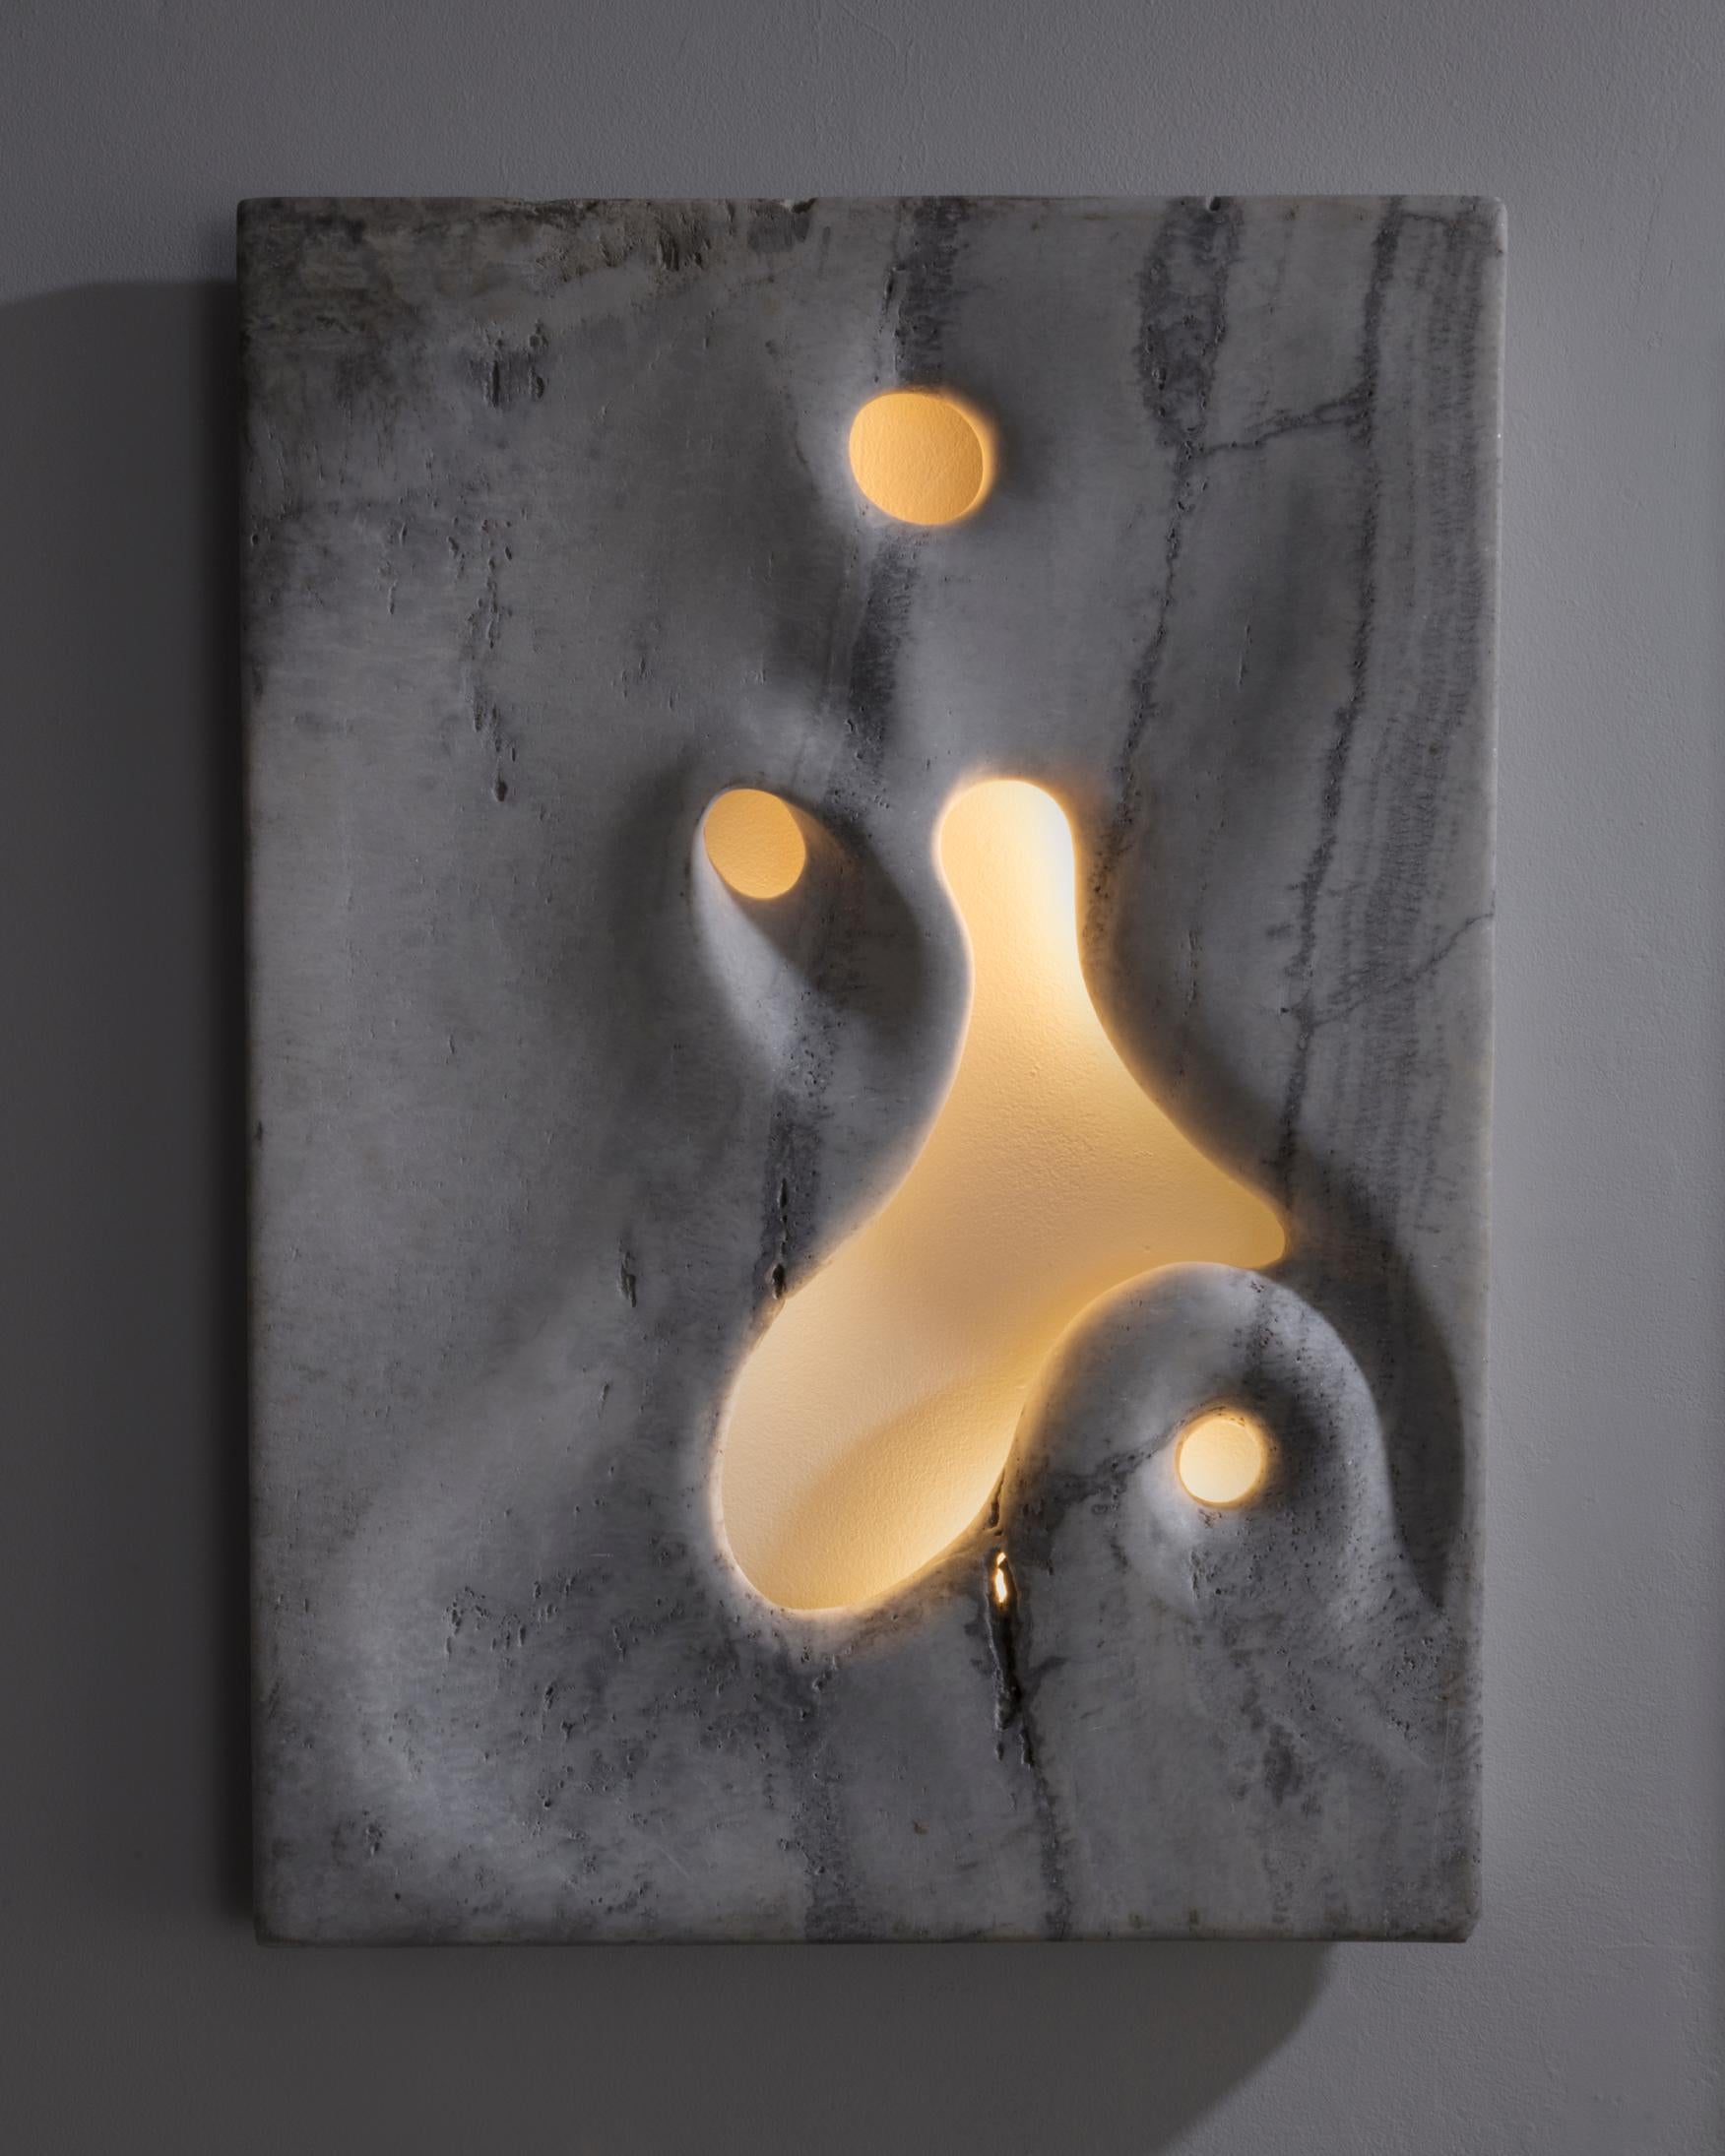 Unique wall-mounted illuminated sculpture in hand carved white travertine. Designed and made by Rogan Gregory, USA, 2016.
 